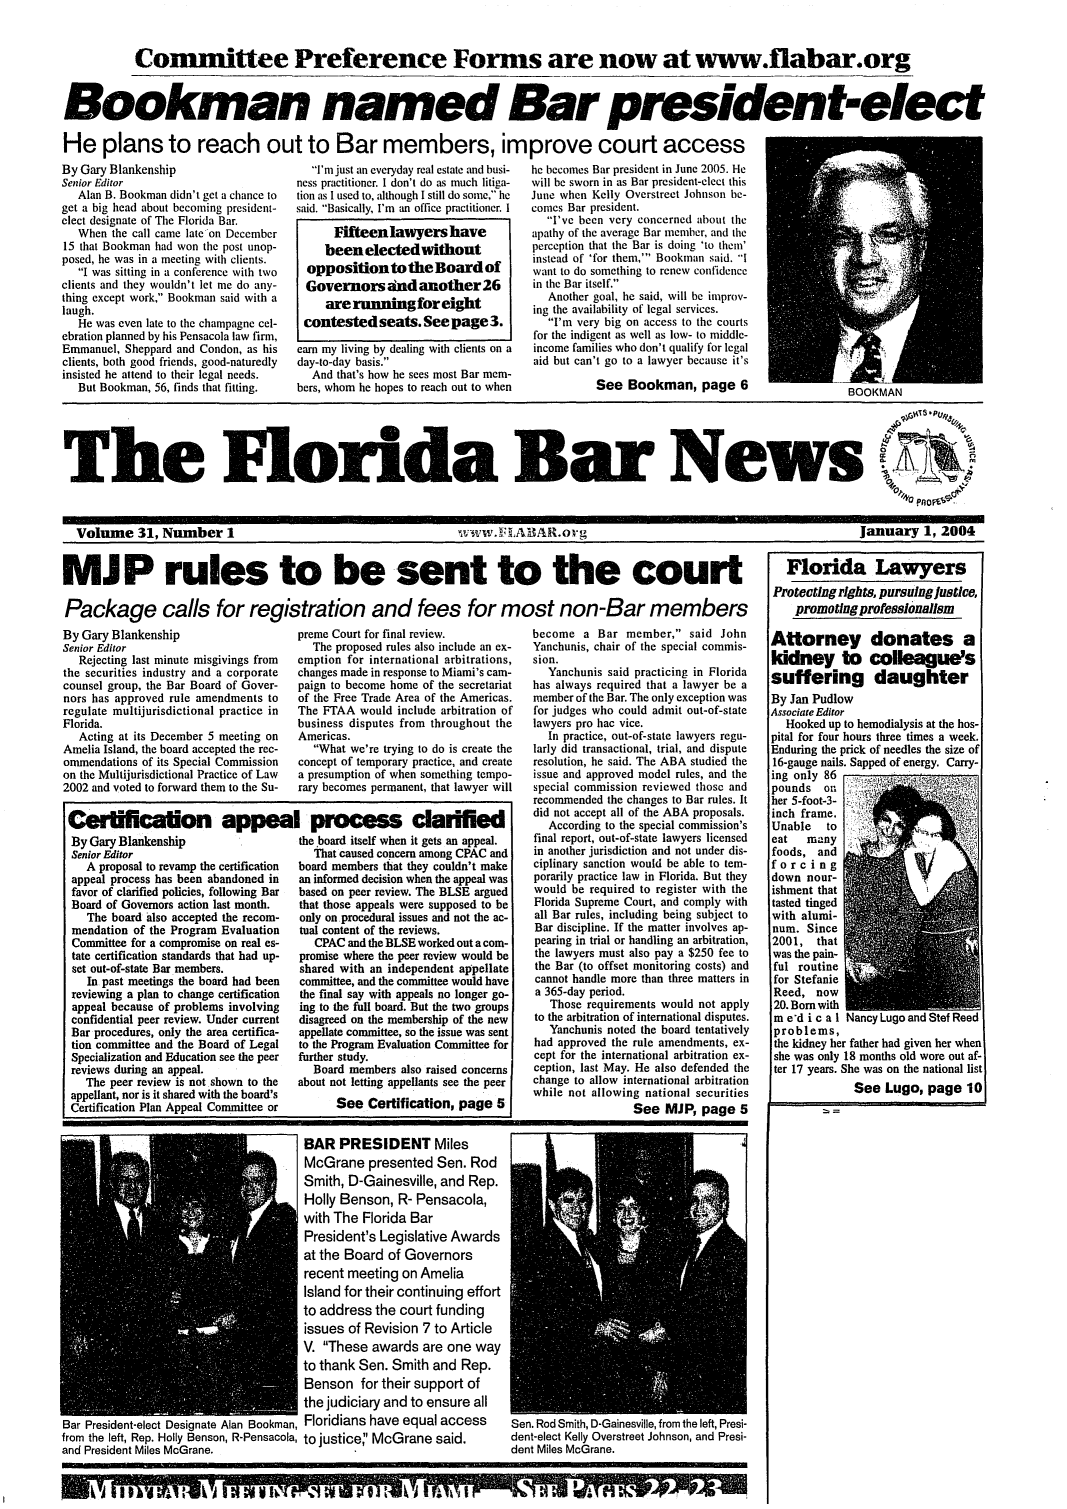 handle is hein.barjournals/flabn0031 and id is 1 raw text is: 


            Committee Preference Forms are now at www.flabar.org



Bookman named Bar president-elect

He plans to reach out to Bar members, improve court access


By Gary Blankenship
Senior Editor
   Alan B. Bookman didn't get a chance to
get a big head about becoming president-
elect designate of The Florida Bar.
   When the call came late on December
15 that Bookman had won the post unop-
posed, he was in a meeting with clients.
   I was sitting in a conference with two
clients and they wouldn't let me do any-
thing except work, Bookman said with a
laugh.
   He was even late to the champagne cel-
ebration planned by his Pensacola law firm,
Emmanuel, Sheppard and Condon, as his
clients, both good friends, good-naturedly
insisted he attend to their legal needs.
   But Bookman, 56, finds that fitting.


  I'm just an everyday real estate and busi-
ness practitioner. I don't do as much litiga-
tion as I used to, although I still do some, he
said. Basically, I'm an office practitioner. I

      Fifteenlawyers have
      been electedwithout
  opposition to the Board of
  Governors nd another 26
     are running for eight
 contested seats. See page 3.

 earn my living by dealing with clients on a
 day-to-day basis.
   And that's how he sees most Bar mem-
bers, whom he hopes to reach out to when


he becomes Bar president in June 2005. He
will be sworn in as Bar president-elect this
June when Kelly Overstreet Johnson be-
comes Bar president.
   I've been very concerned about the
apathy of the average Bar member, and the
perception that the Bar is doing 'to them'
instead of 'for them,' Bookman said. 1
want to do something to renew confidence
in the Bar itself.
   Another goal, he said, will be improv-
ing the availability of legal services.
   I'm very big on access to the courts
for the indigent as well as low- to middle-
income families who don't qualify for legal
aid but can't go to a lawyer because it's

           See Bookman, page 6


The Florida Bar News °



  Volume 31, Number 1                                           wvwvw.  EABAR.og                                                 January 1, 2004


MJP rules to be sent to the court

Package calls for registration and fees for most non-Bar members


By Gary Blankenship
Senior Editor
   Rejecting last minute misgivings from
the securities industry and a corporate
counsel group, the Bar Board of Gover-
nors has approved rule amendments to
regulate multijurisdictional practice in
Florida.
   Acting at its December 5 meeting on
Amelia Island, the board accepted the rec-
ommendations of its Special Commission
on the Multijurisdictional Practice of Law
2002 and voted to forward them to the Su-


preme Court for final review.
  The proposed rules also include an ex-
emption for international arbitrations,
changes made in response to Miami's cam-
paign to become home of the secretariat
of the Free Trade Area of the Americas.
The FTAA would include arbitration of
business disputes from throughout the
Americas.
   What we're trying to do is create the
concept of temporary practice, and create
a presumption of when something tempo-
rary becomes permanent, that lawyer will


Certificatlon appeal process claified
By Gary Blankenship                  the board itself when it gets an appeal.
Senior Editor                           that caused concern among CPAC and
   A proposal to revamp the certification  board members that they couldn't make
 appeal process has been abandoned in an informed decision when the appeal was
 favor of clarified policies, following Bar  based on peer review. The BLSE argued
 Board of Governors action last month.  that those appeals were supposed to be
   The board also accepted the recom- only on procedural issues and not the ac-
 mendation of the Program Evaluation  tual content of the reviews.
 Committee for a compromise on real es- CPAC and the BLSE worked out a com-
 tate certification standards that had up-  promise where the peer review would be
 set out-of-state Bar members,        shared with an independent appellate
   In past meetings the board had been committee, and the committee would have
 reviewing a plan to change certification  the final say with appeals no longer go-
 appeal because of problems involving ing to the full board. But the two groups
 confidential peer review. Under current  disagreed on the membership of the new
 Bar procedures, only the area certifica-  appellate committee, so the issue was sent
 tion committee and the Board of Legal  to the Program Evaluation Committee for
 Specialization and Education see the peer  further study.
 reviews during an appeal.              Board members also raised concerns
   The peer review is not shown to the  about not letting appellants see the peer
appellant, nor is it shared with the board's
Certification Plan Appeal Committee or     See Certification, page 5


become a Bar member, said John
Yanchunis, chair of the special commis-
sion.
   Yanchunis said practicing in Florida
has always required that a lawyer be a
member of the Bar. The only exception was
for judges who could admit out-of-state
lawyers pro hac vice.
   In practice, out-of-state lawyers regu-
larly did transactional, trial, and dispute
resolution, he said. The ABA studied the
issue and approved model rules, and the
special commission reviewed those and
recommended the changes to Bar rules. It
did not accept all of the ABA proposals.
   According to the special commission's
final report, out-of-state lawyers licensed
in another jurisdiction and not under dis-
ciplinary sanction would be able to tem-
porarily practice law in Florida. But they
would be required to register with the
Florida Supreme Court, and comply with
all Bar rules, including being subject to
Bar discipline. If the matter involves ap-
pearing in trial or handling an arbitration,
the lawyers must also pay a $250 fee to
the Bar (to offset monitoring costs) and
cannot handle more than three matters in
a 365-day period.
   Those requirements would not apply
to the arbitration of international disputes.
   Yanchunis noted the board tentatively
had approved the rule amendments, ex-
cept for the international arbitration ex-
ception, last May. He also defended the
change to allow international arbitration
while not allowing national securities
                See MJP, page 5


BAR PRESIDENT Miles
McGrane presented Sen. Rod
Smith, D-Gainesville, and Rep.
Holly Benson, R- Pensacola,
with The Florida Bar
President's Legislative Awards
at the Board of Governors
recent meeting on Amelia
Island for their continuing effort
to address the court funding
issues of Revision 7 to Article
V. These awards are one way
to thank Sen. Smith and Rep.
Benson for their support of


                                      the judiciary and to ensure all
Bar President-elect Designate Alan Bookman, Floridians have equal access
from the left, Rep. Holly Benson, R-Pensacola, to justice' McGrane said.
and President Miles McGrane.


Sen. Rod Smith, D-Gainesville, from the left, Presi-
dent-elect Kelly Overstreet Johnson, and Presi-
dent Miles McGrane.


U70-  * Li Vii '  L  *i


   Florida Lawyers
Protecting rights, pursuing Justice,
    promoting professionalism

Attorney donates a
kidney to colleague's
suffering daughter
By Jan Pudlow
Associate Editor
  Hooked up to hemodialysis at the hos-
pital for four hours three times a week.
Enduring the prick of needles the size of
16-gauge nails. Sapped of energy. Carry-
ing only 86
pounds on.
her 5-foot-3-
inch frame.
Unable to
eat   many
foods, and
forcing
down nour-
ishment that
tasted tinged
with alumi-
num. Since
2001,  that
was the pain-
ful routine
for Stefanie
Reed, now
20. Born with
m e'd i c a I Nancy Lugo and Stef Reed
problems,
the kidney her father had given her when
she was only 18 months old wore out af-
ter 17 years. She was on the national list
             See Lugo, page 10


BOOKMAN


